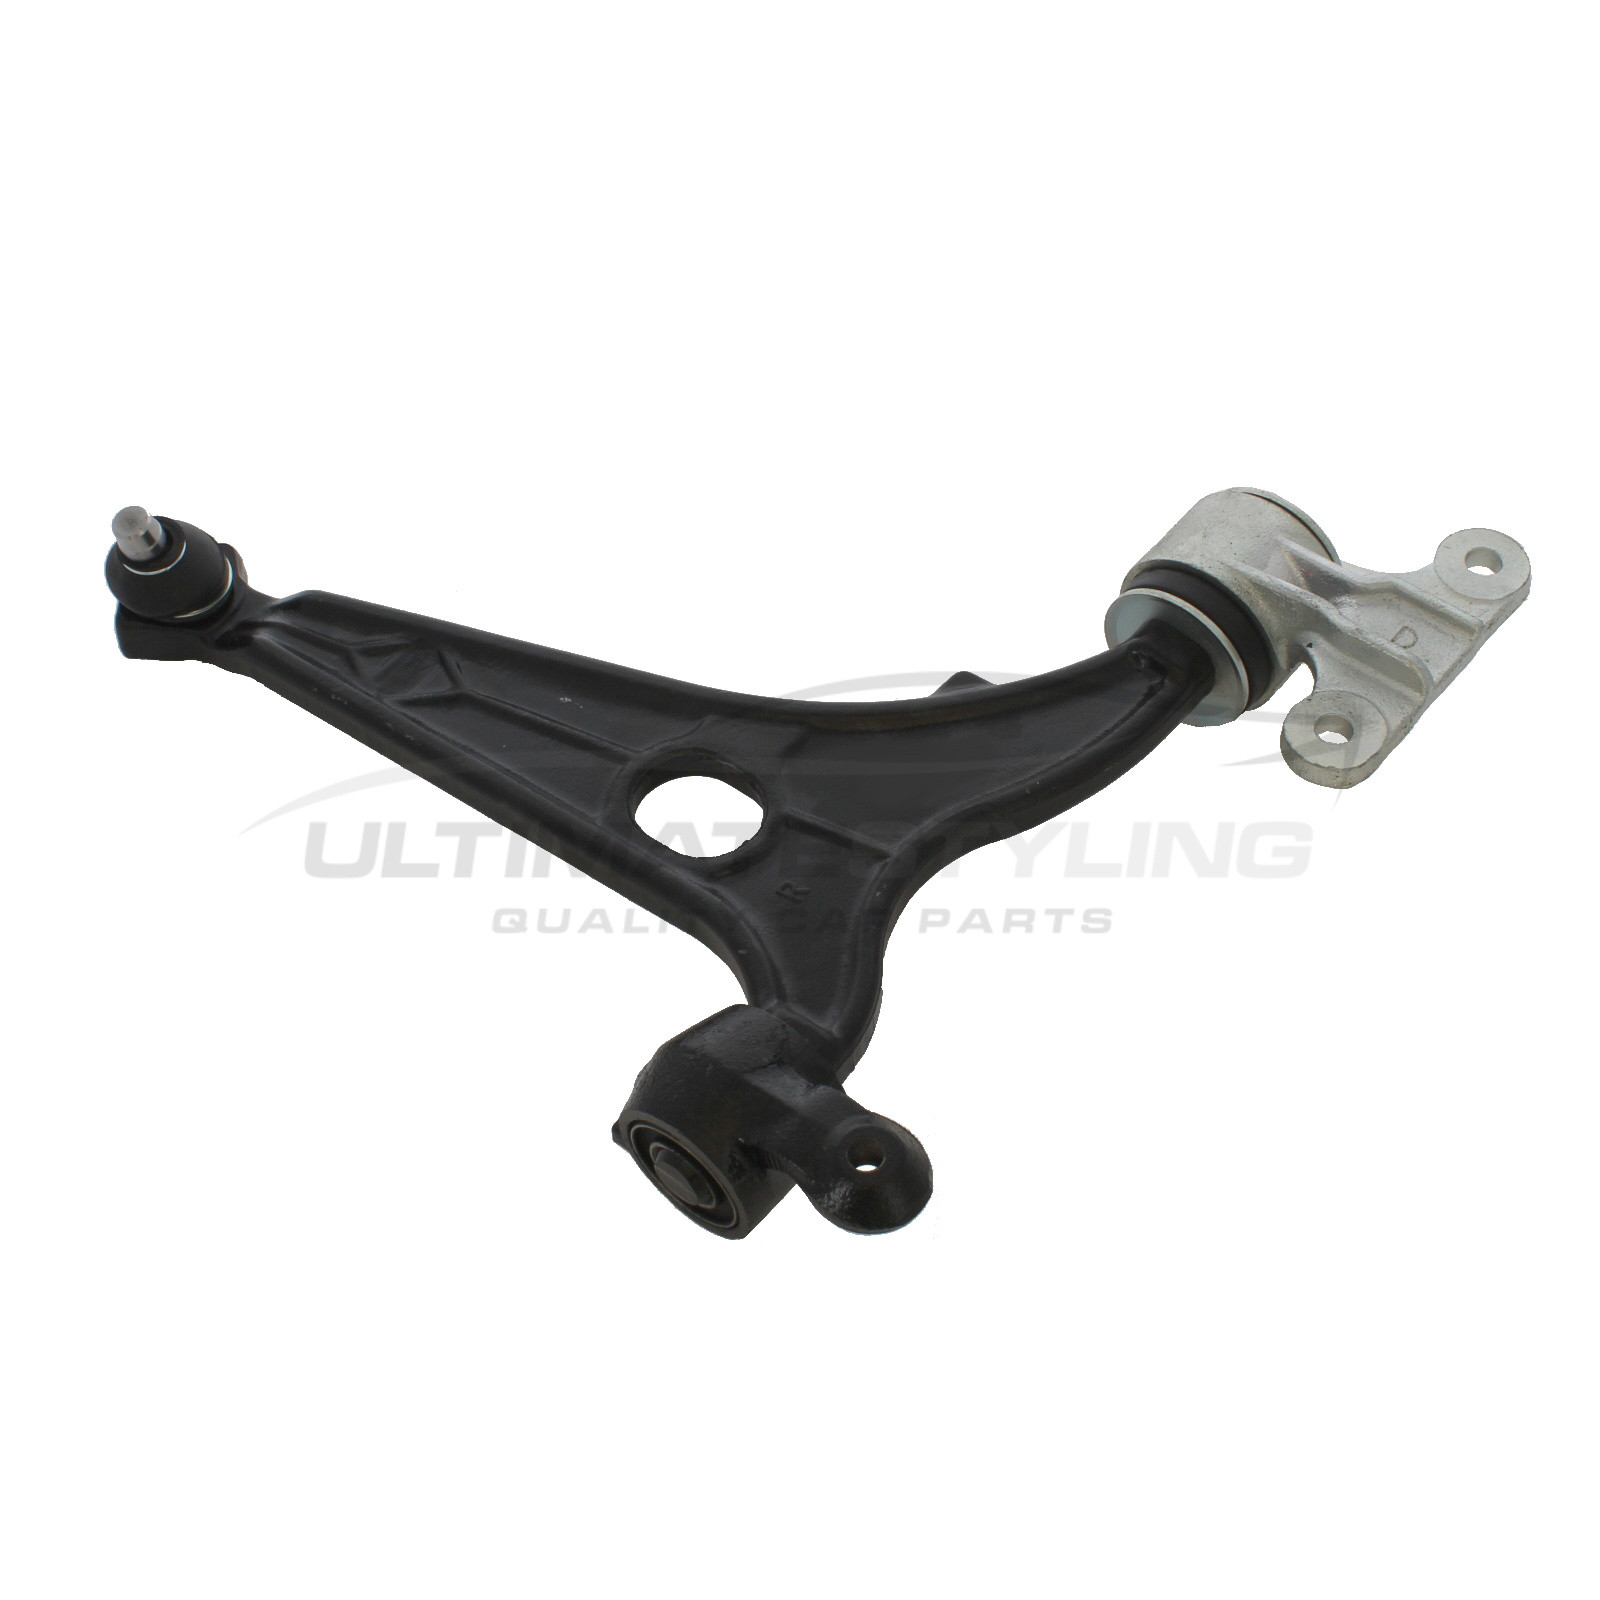 Citroen C8 2003-2009, Fiat Ulysse 2003-2006, Peugeot 807 2002-2010 Front Lower Suspension Arm (Steel) Including Ball Joint and Rear Bush Driver Side (RH)